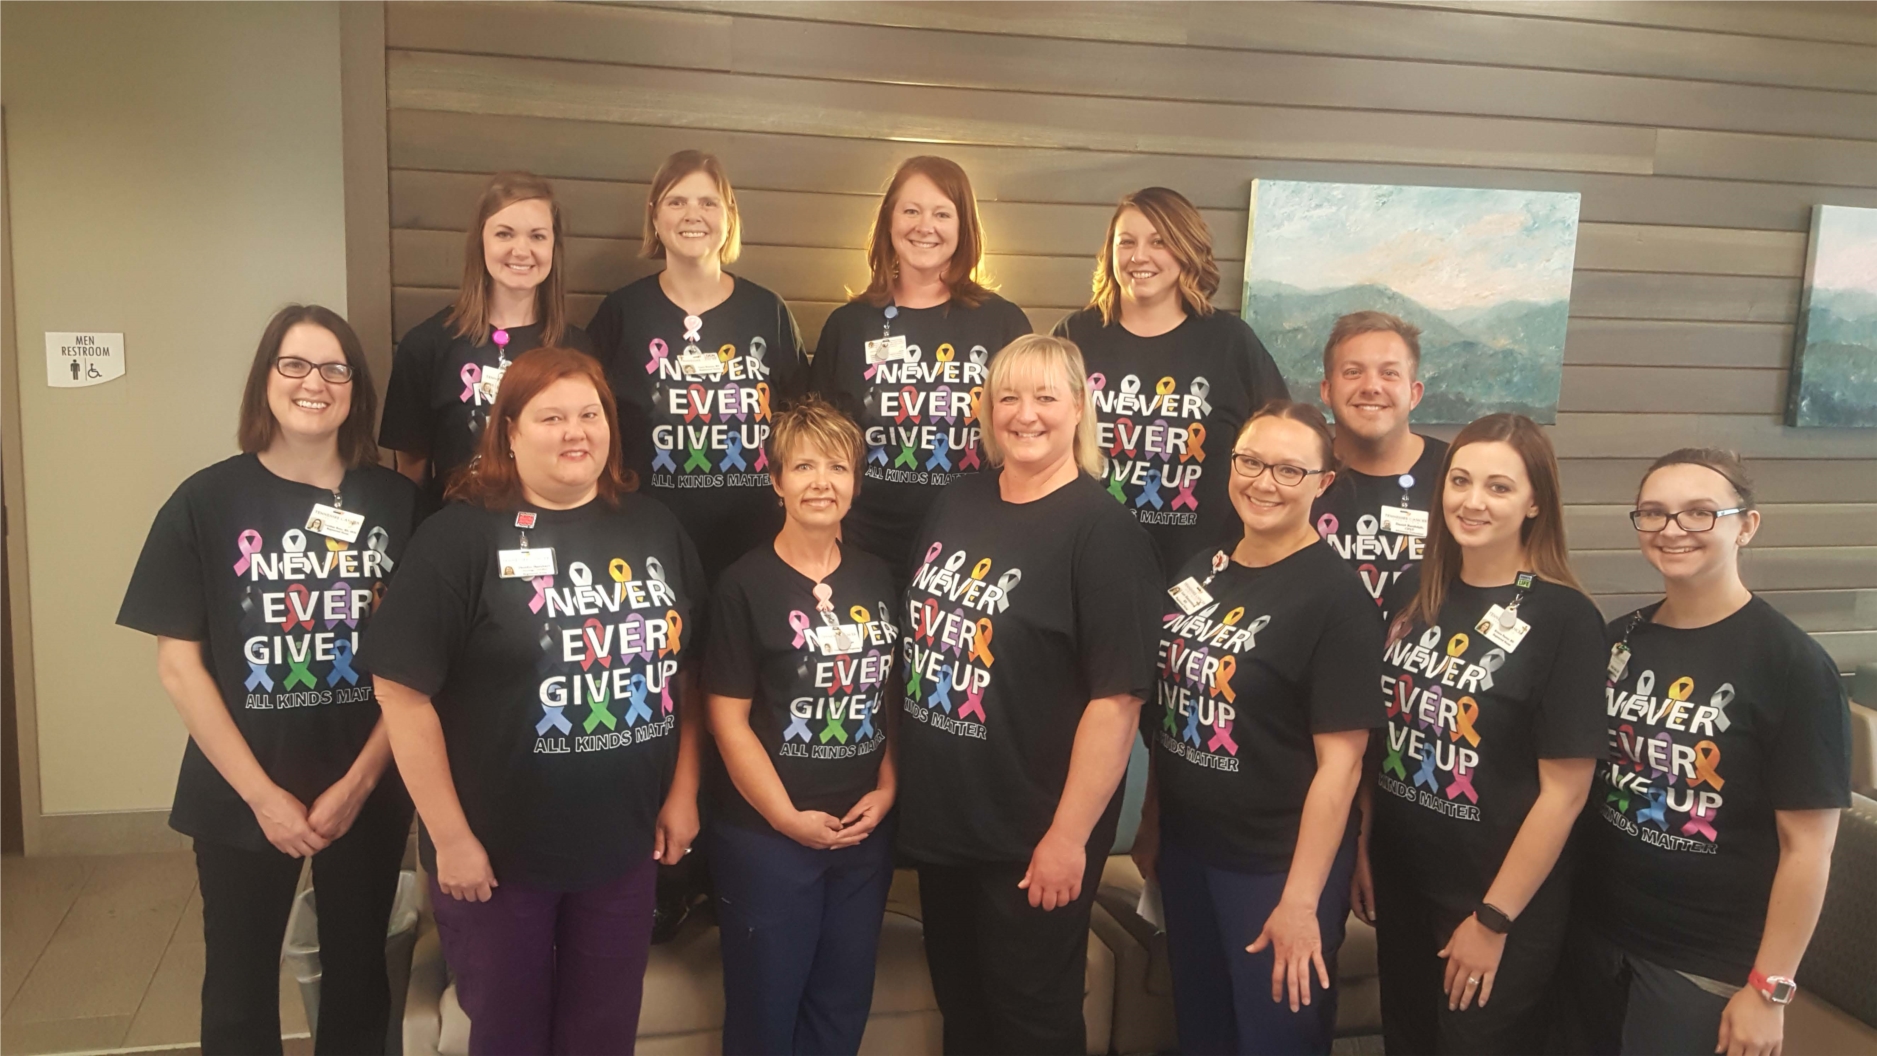 Our West office shows their support for our cancer patients and survivors.